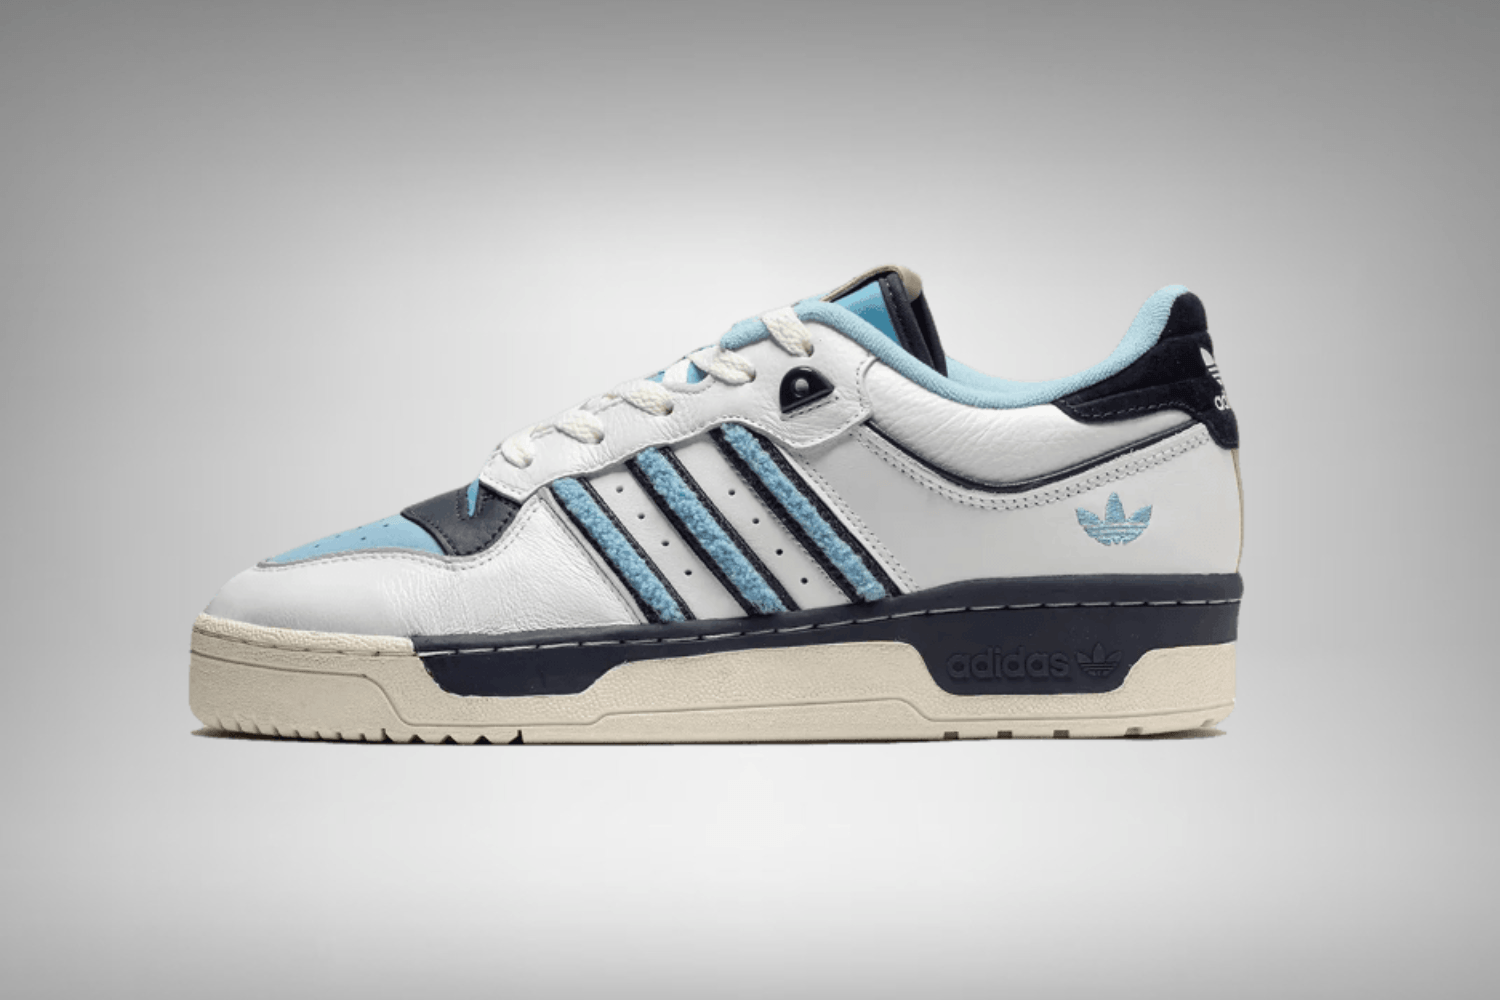 adidas goes vintage with Rivalry Low 86 'Tar Heels'